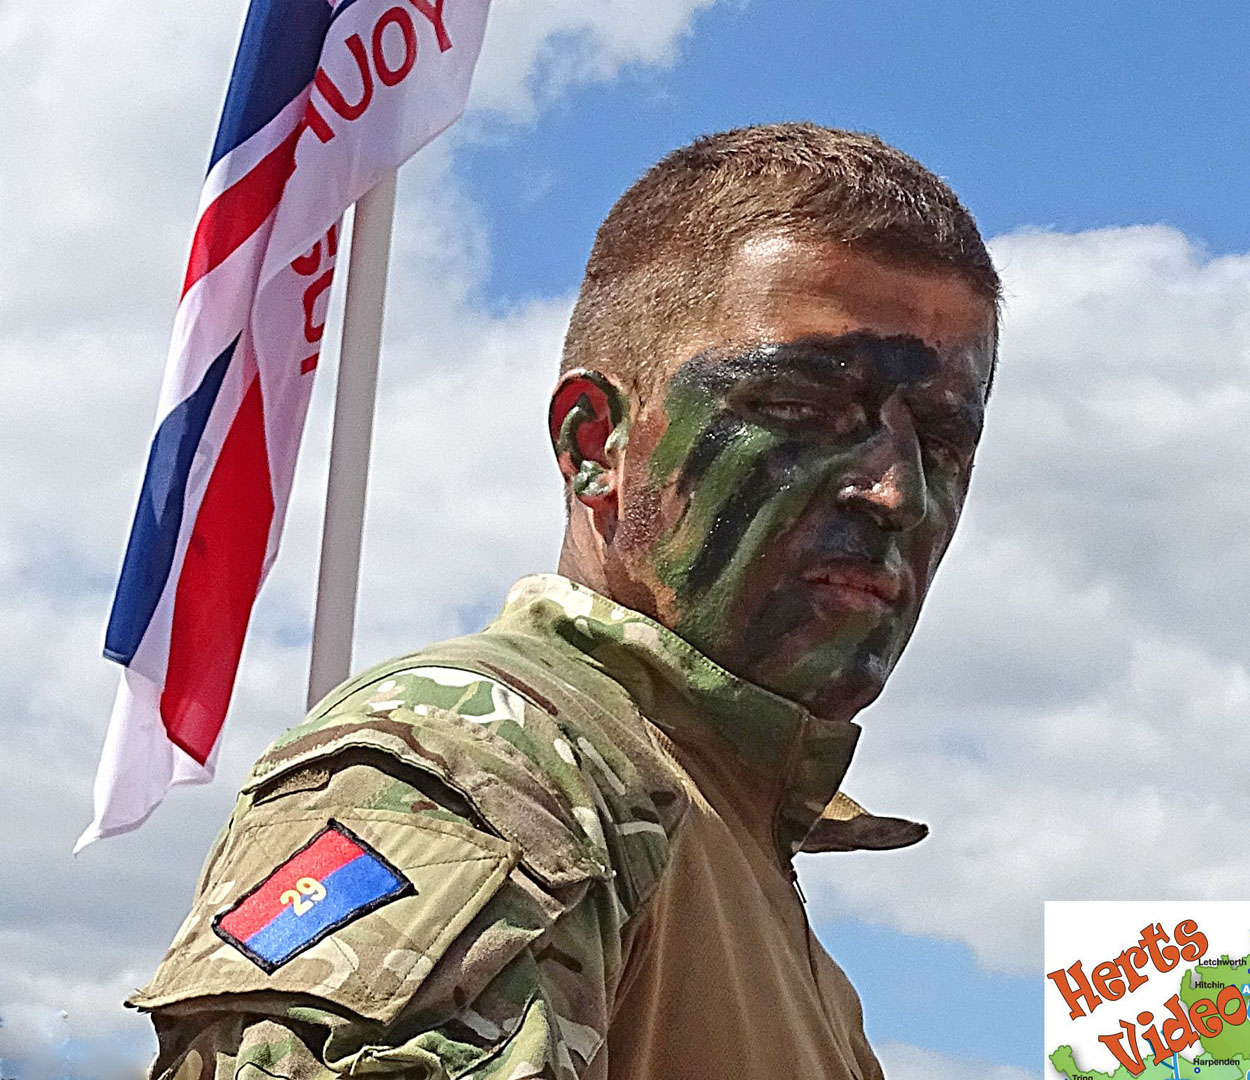 HARPENDEN ARMED FORCES DAY ARMY SOLDIER